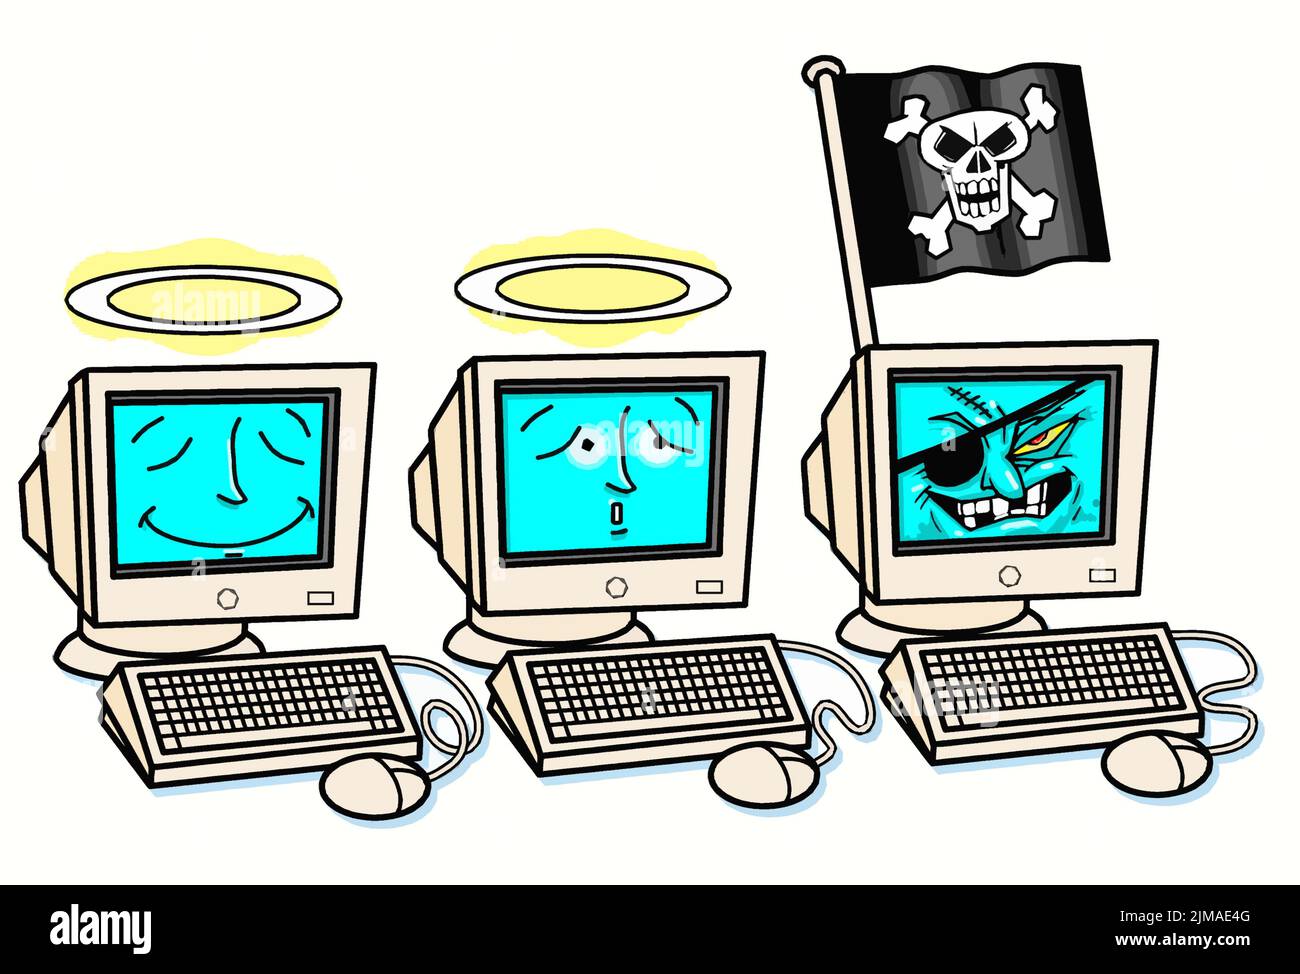 Concept art, illustrating software internet computer piracy, including illegal copying, distribution sale, distribution or use of copyrighted software Stock Photo